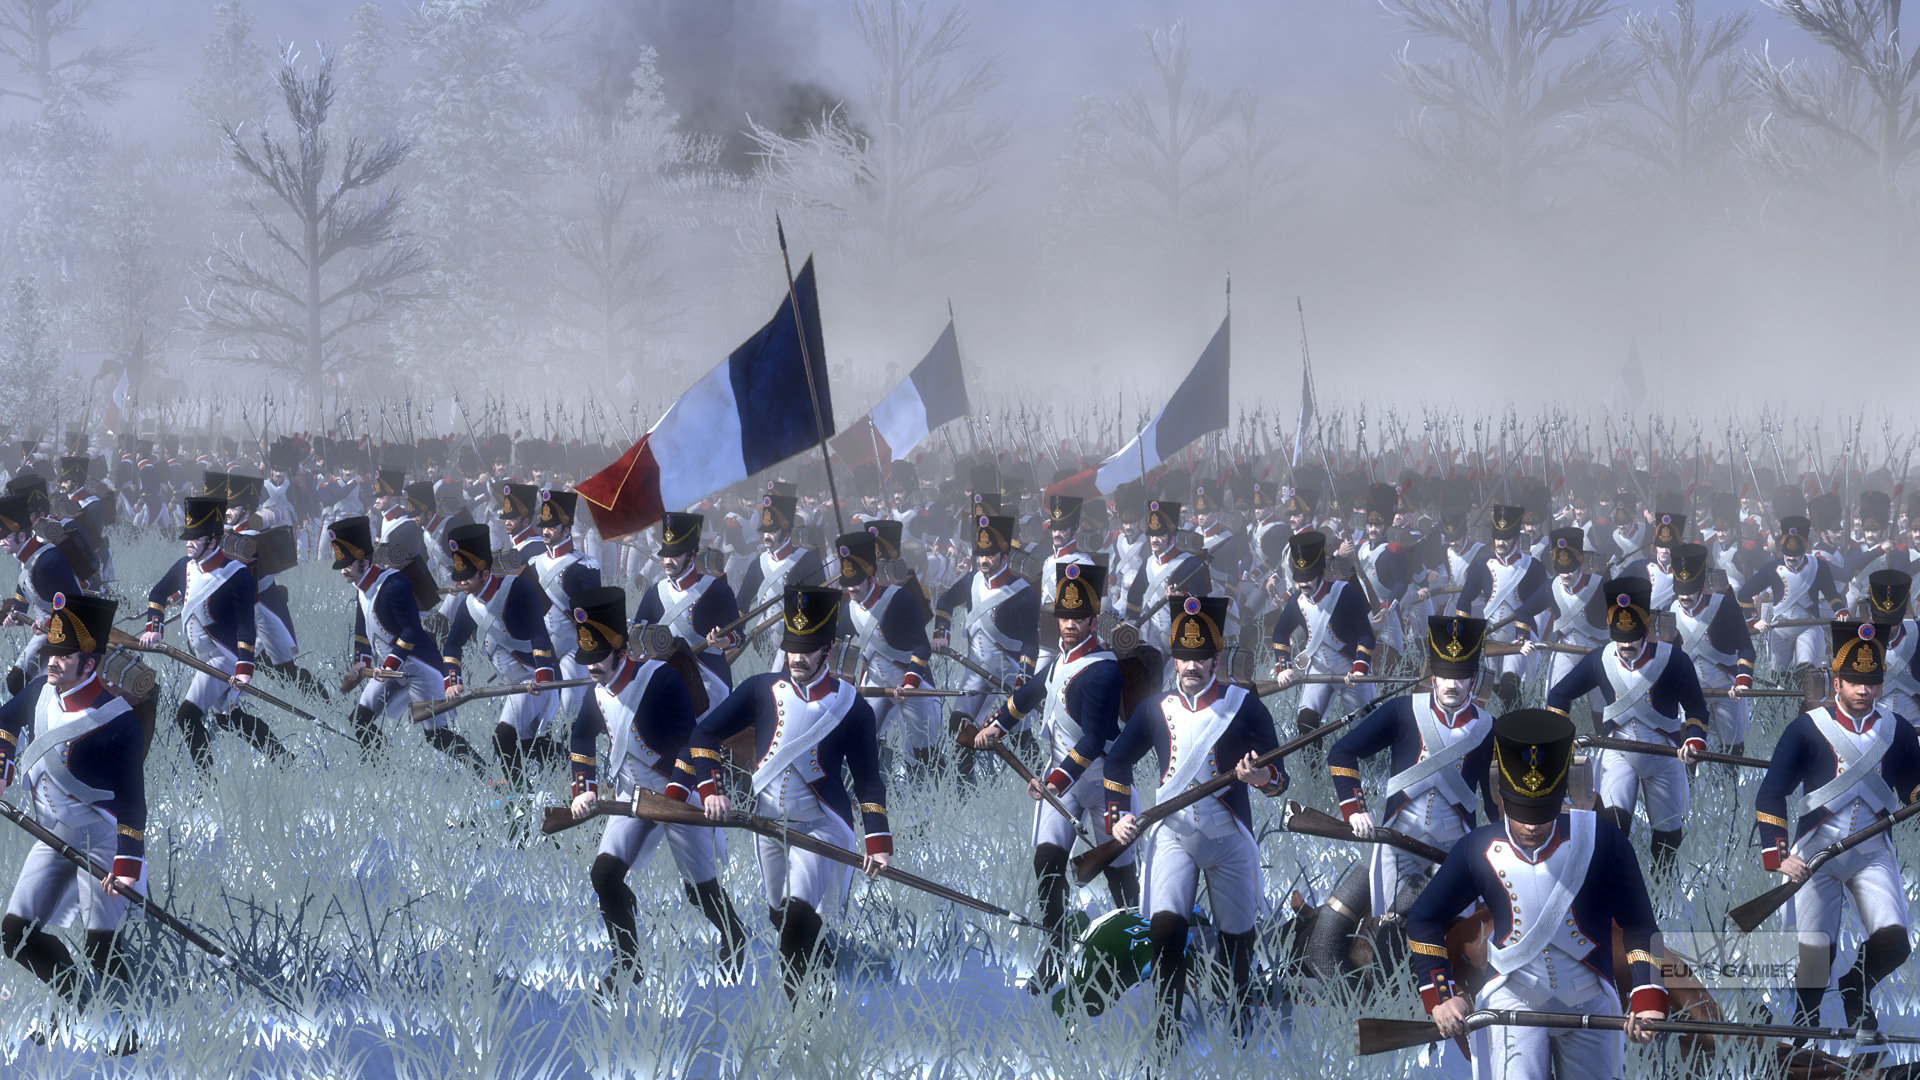 Free download this napoleon total war wallpaper is available in 24 sizes [1920x1080] for your Desktop, Mobile & Tablet. Explore Napoleon Total War Wallpaper. Empire Total War Wallpaper, Total